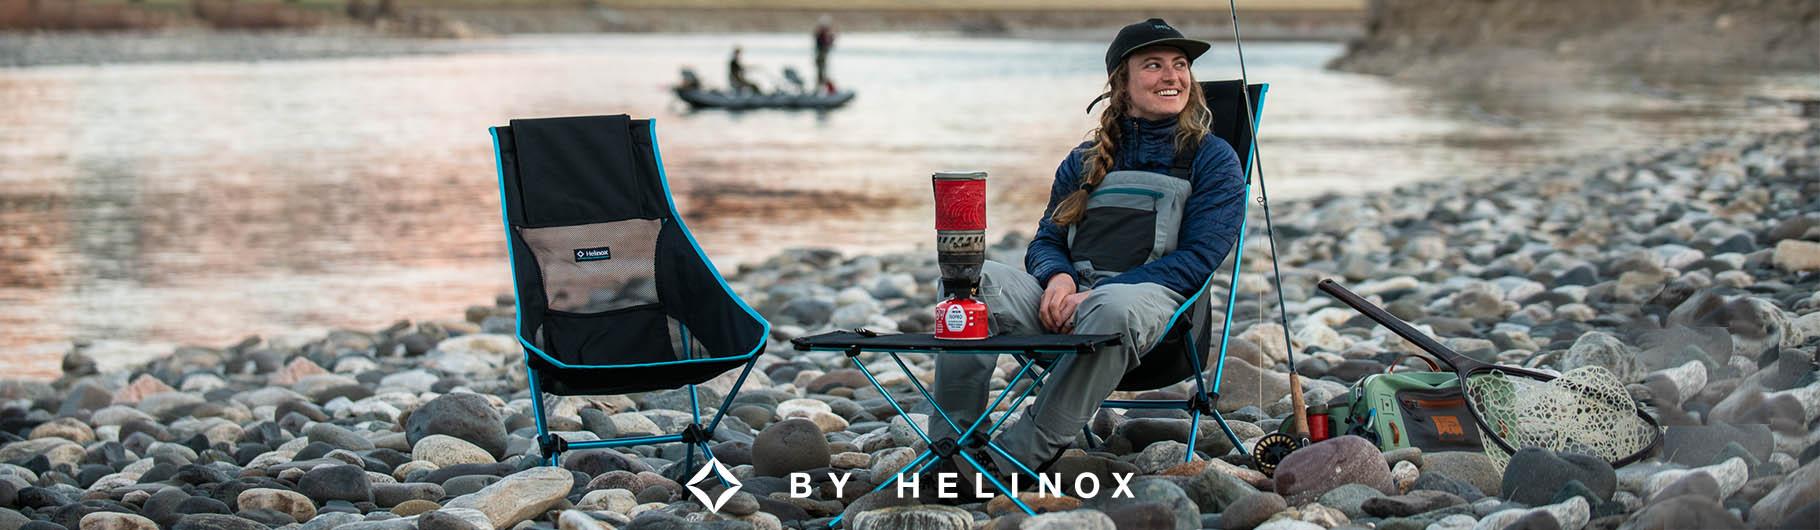 Helinox-ultralight foldable tables and chairs